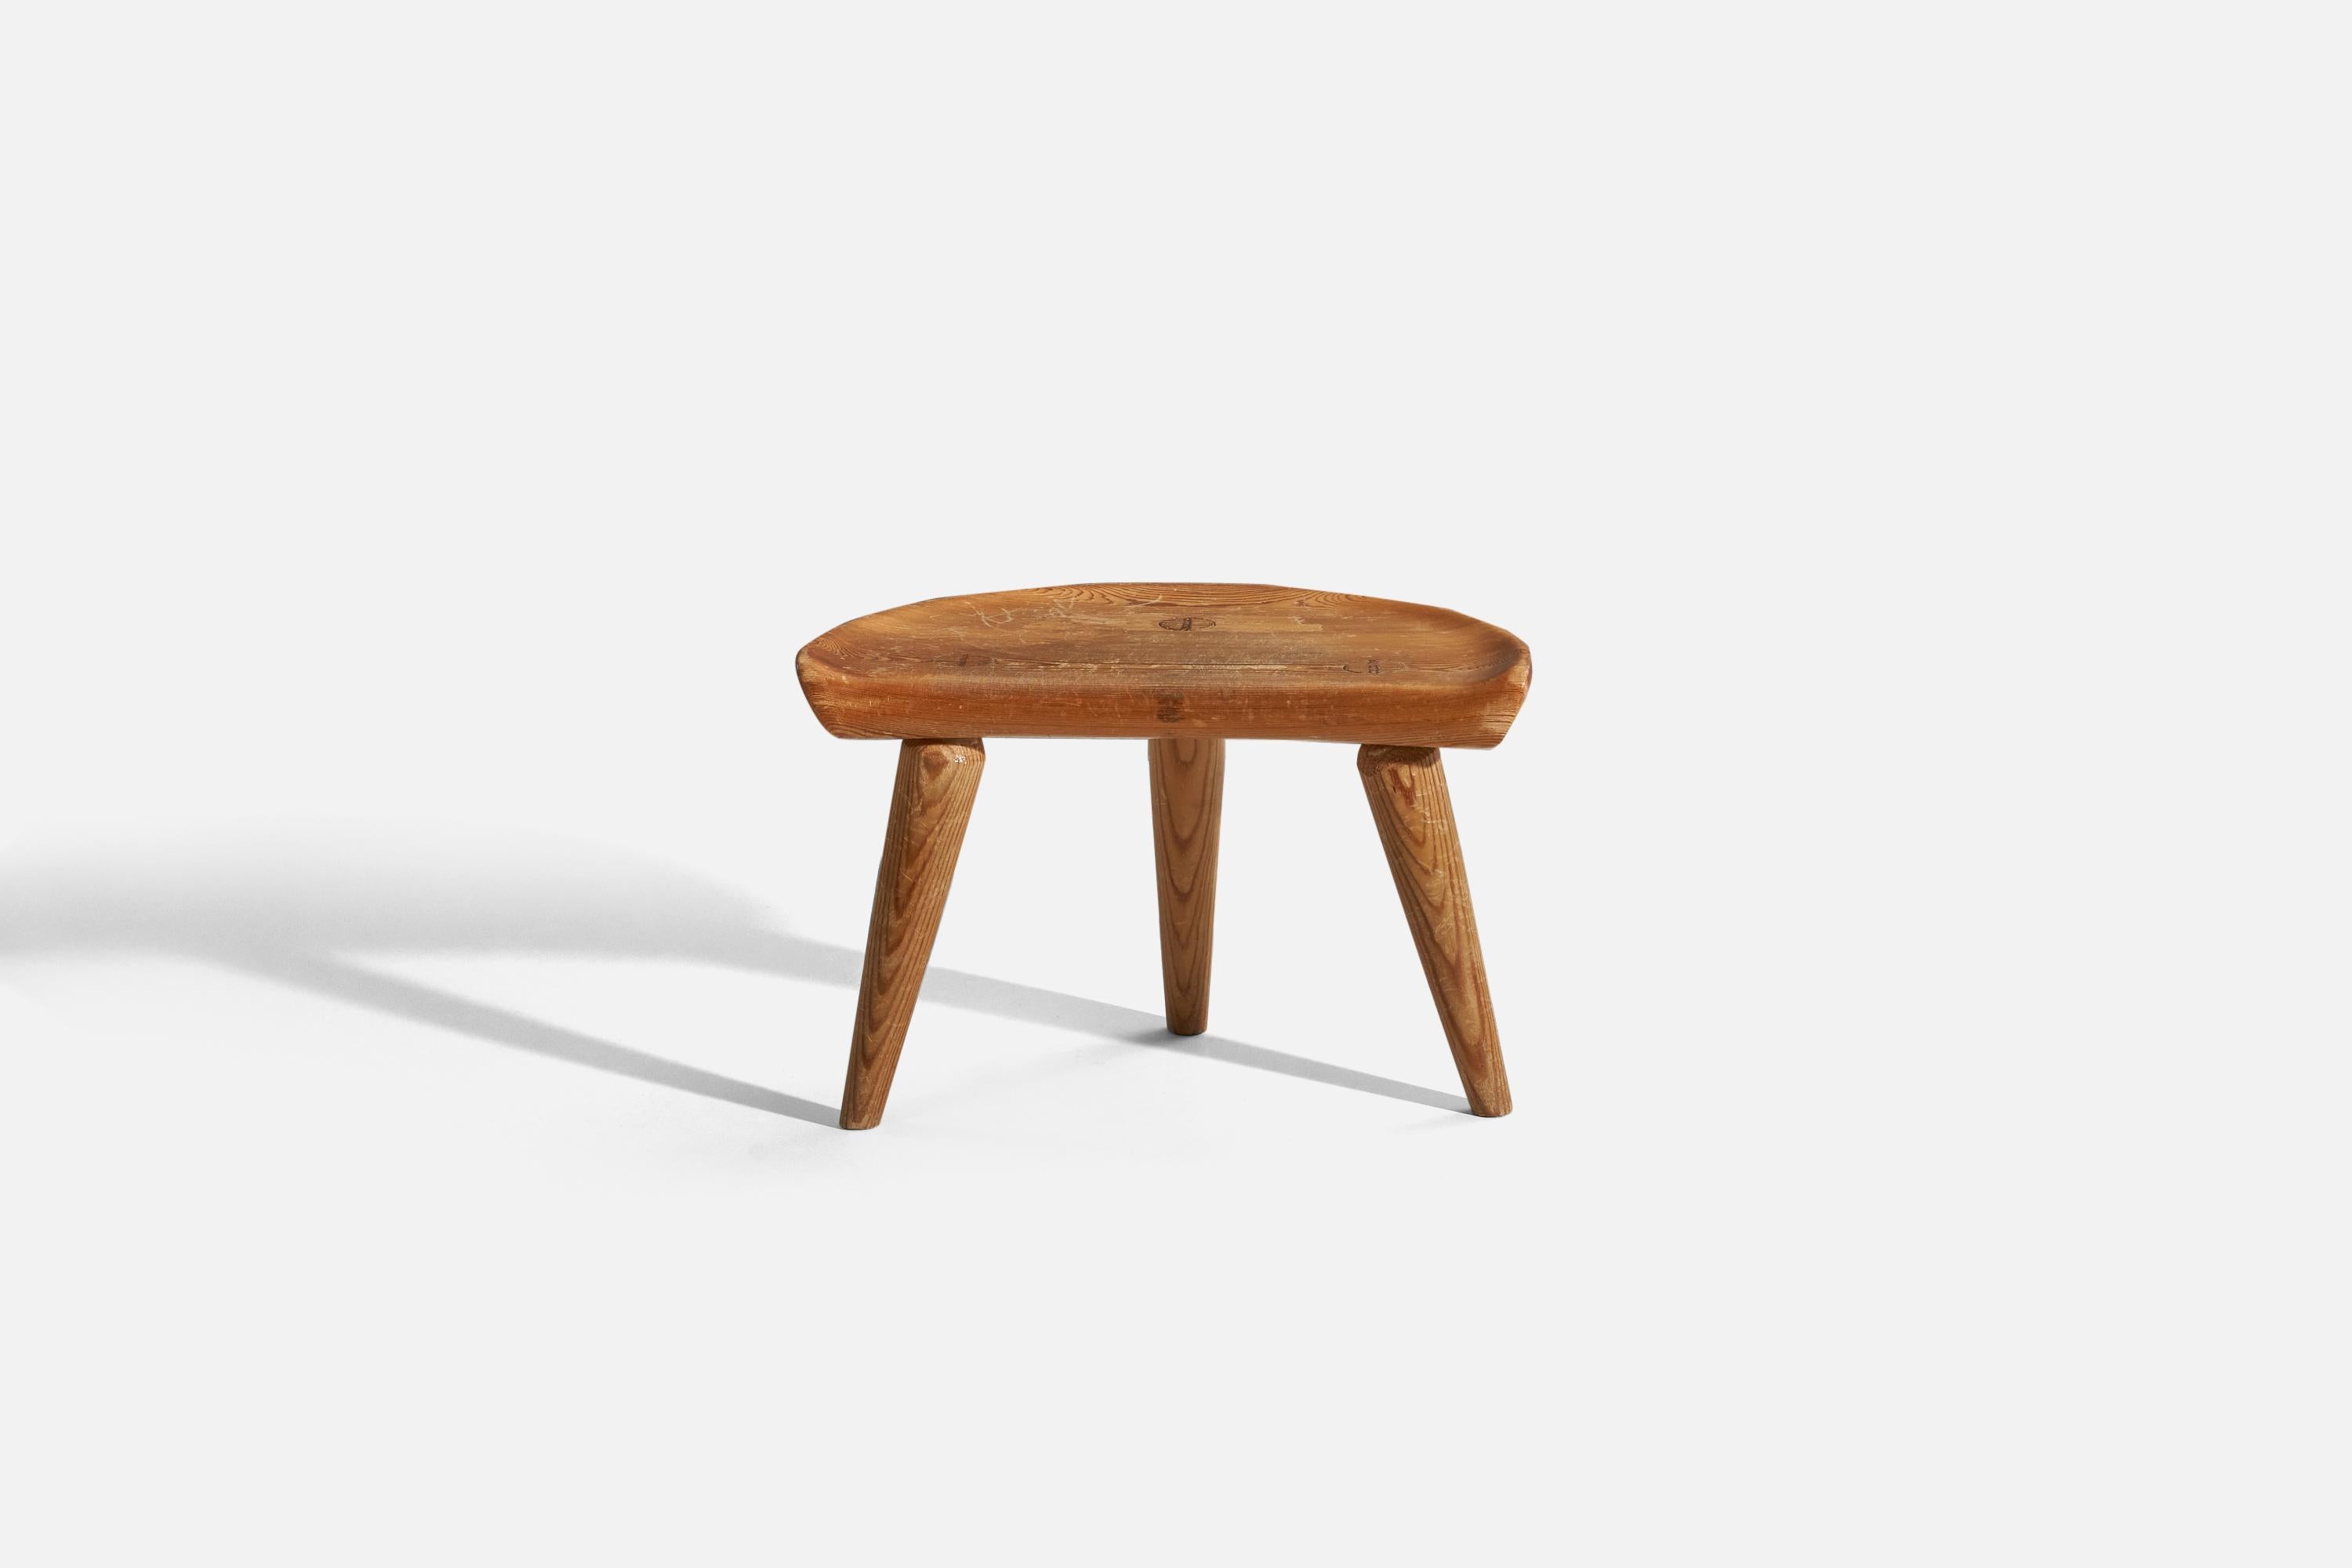 A pine stool designed and produced in Sweden, 1950s.





